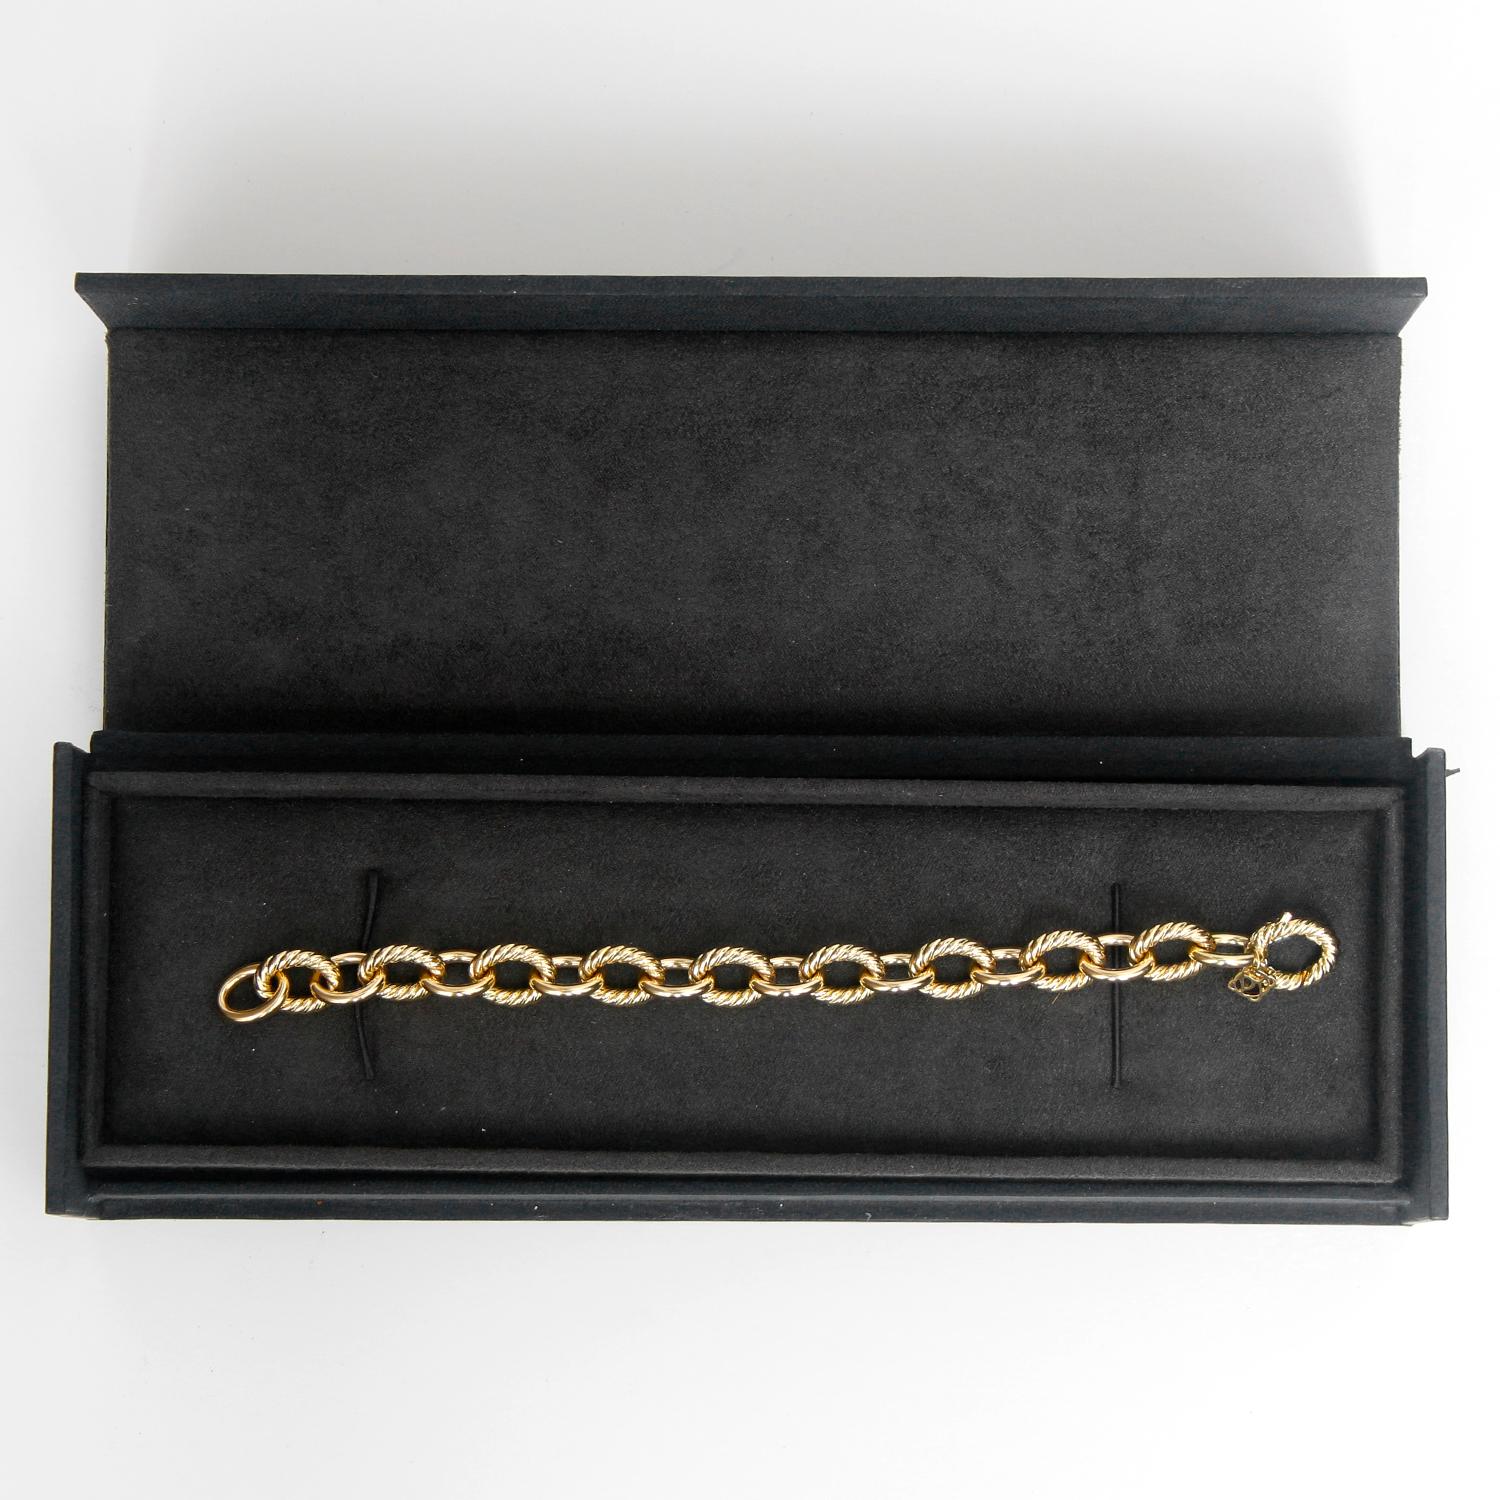 David Yurman Large Oval Link Bracelet - 18K Yellow gold  oval link bracelet. Alternating between a solid link and David Yurman's signature rope link. 12 mm wide with a lobster clasp. Total weight 31.2 grams .